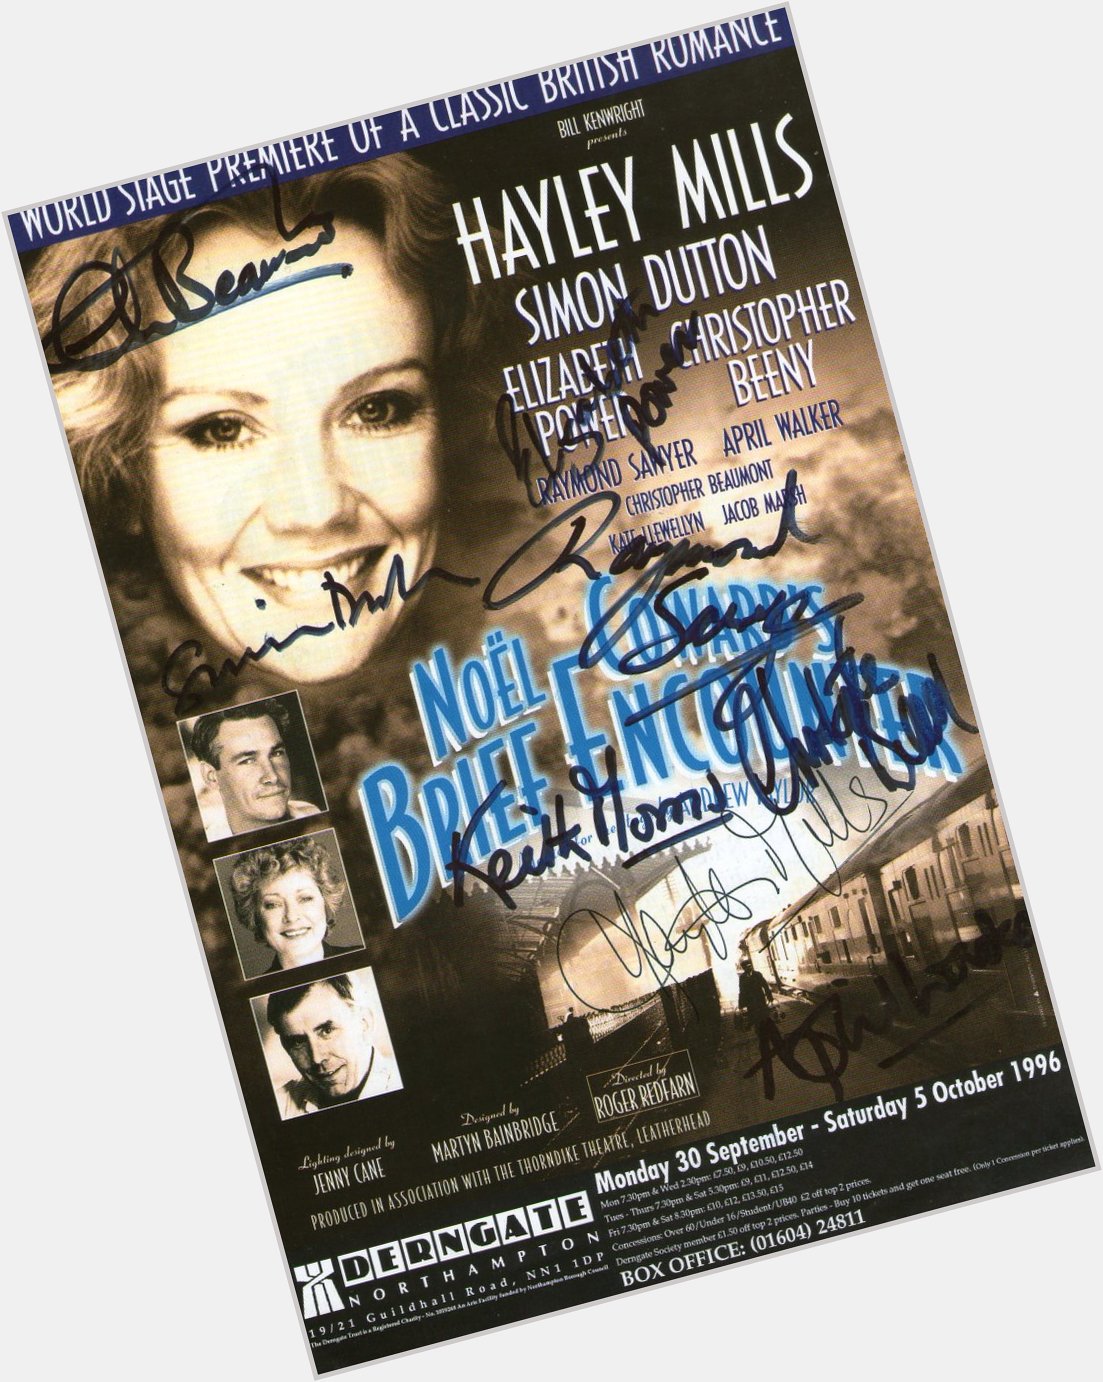 Happy birthday to Hayley Mills Dad has worked with some amazing people including her. 